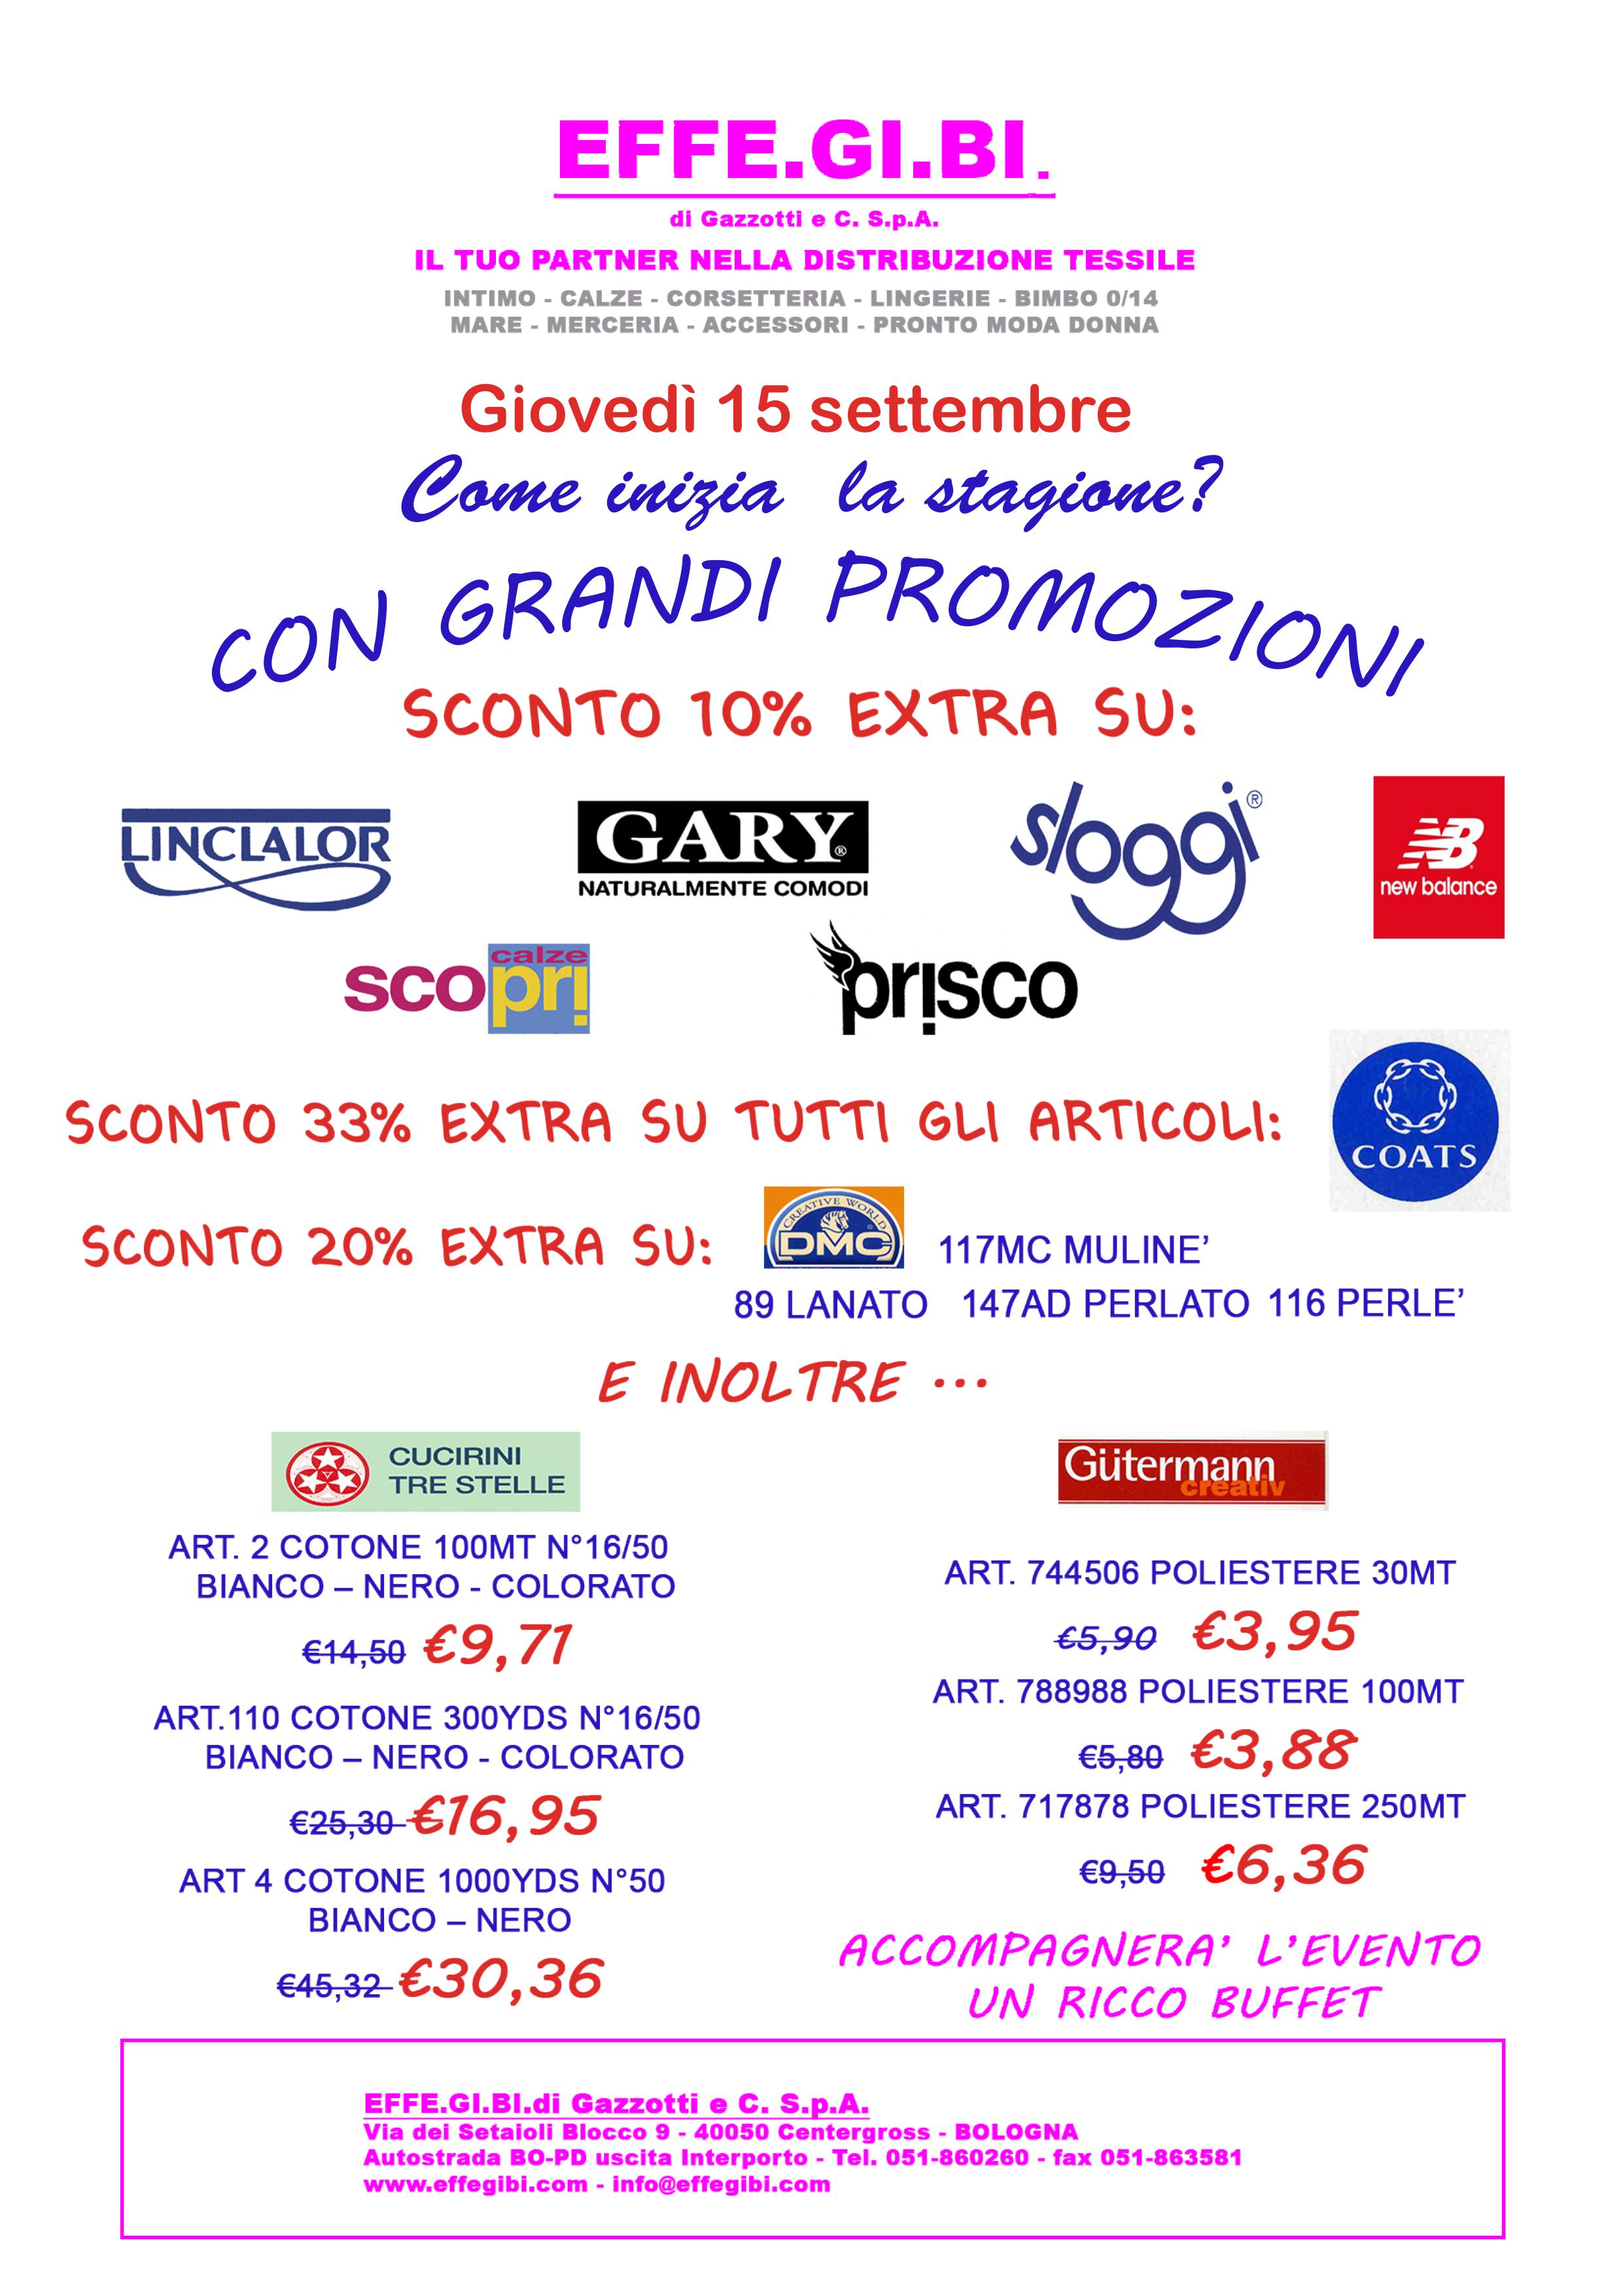 Thursday 15 September, Great deals in our store !